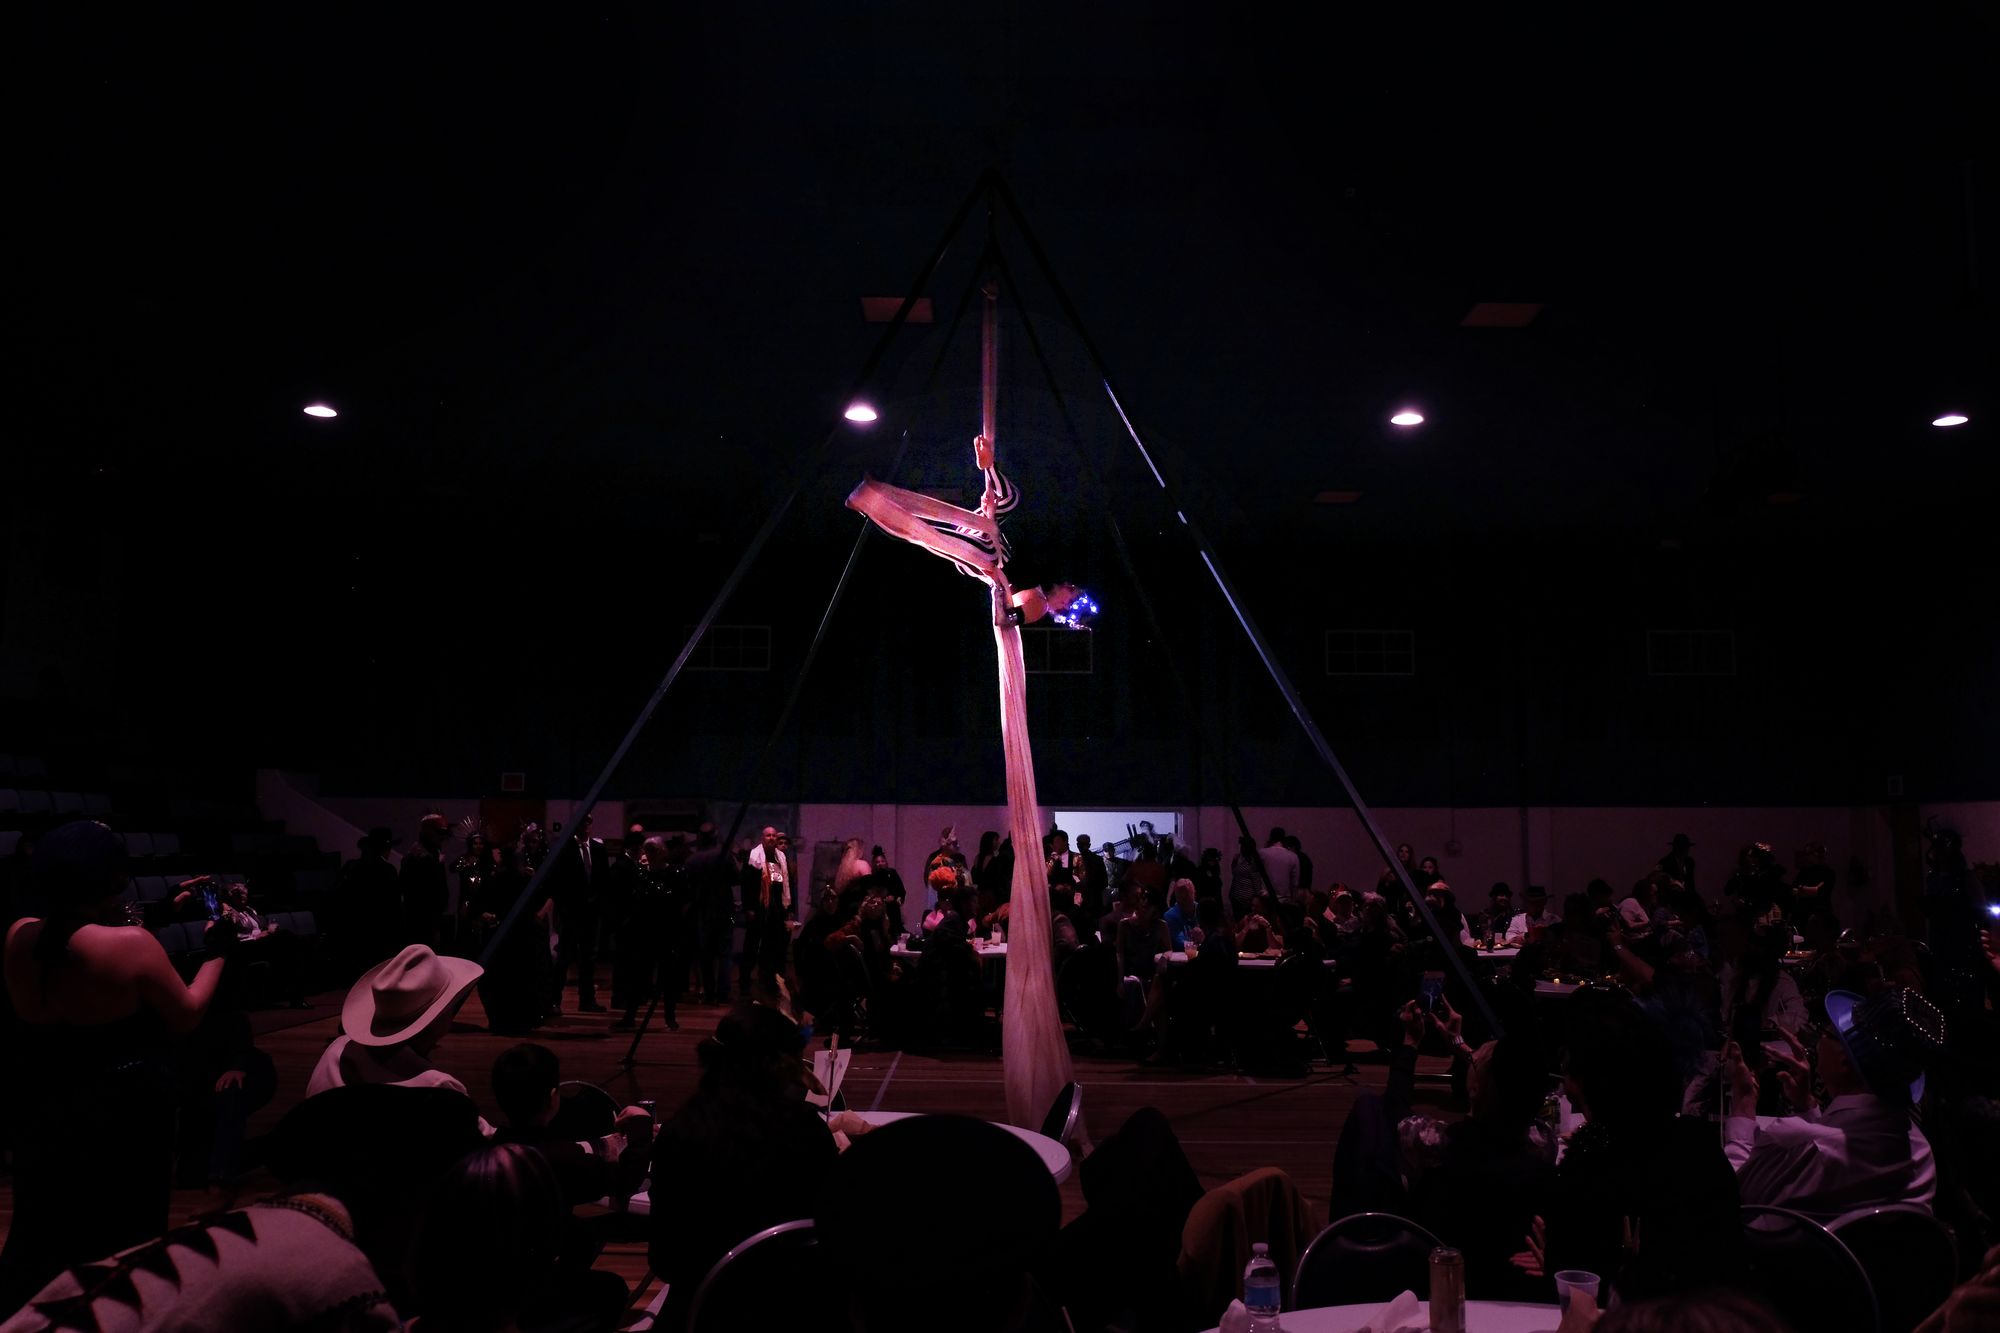 Woman performing aerial silks on white fabric in a dimly lit gymnasium at a masquerade ball